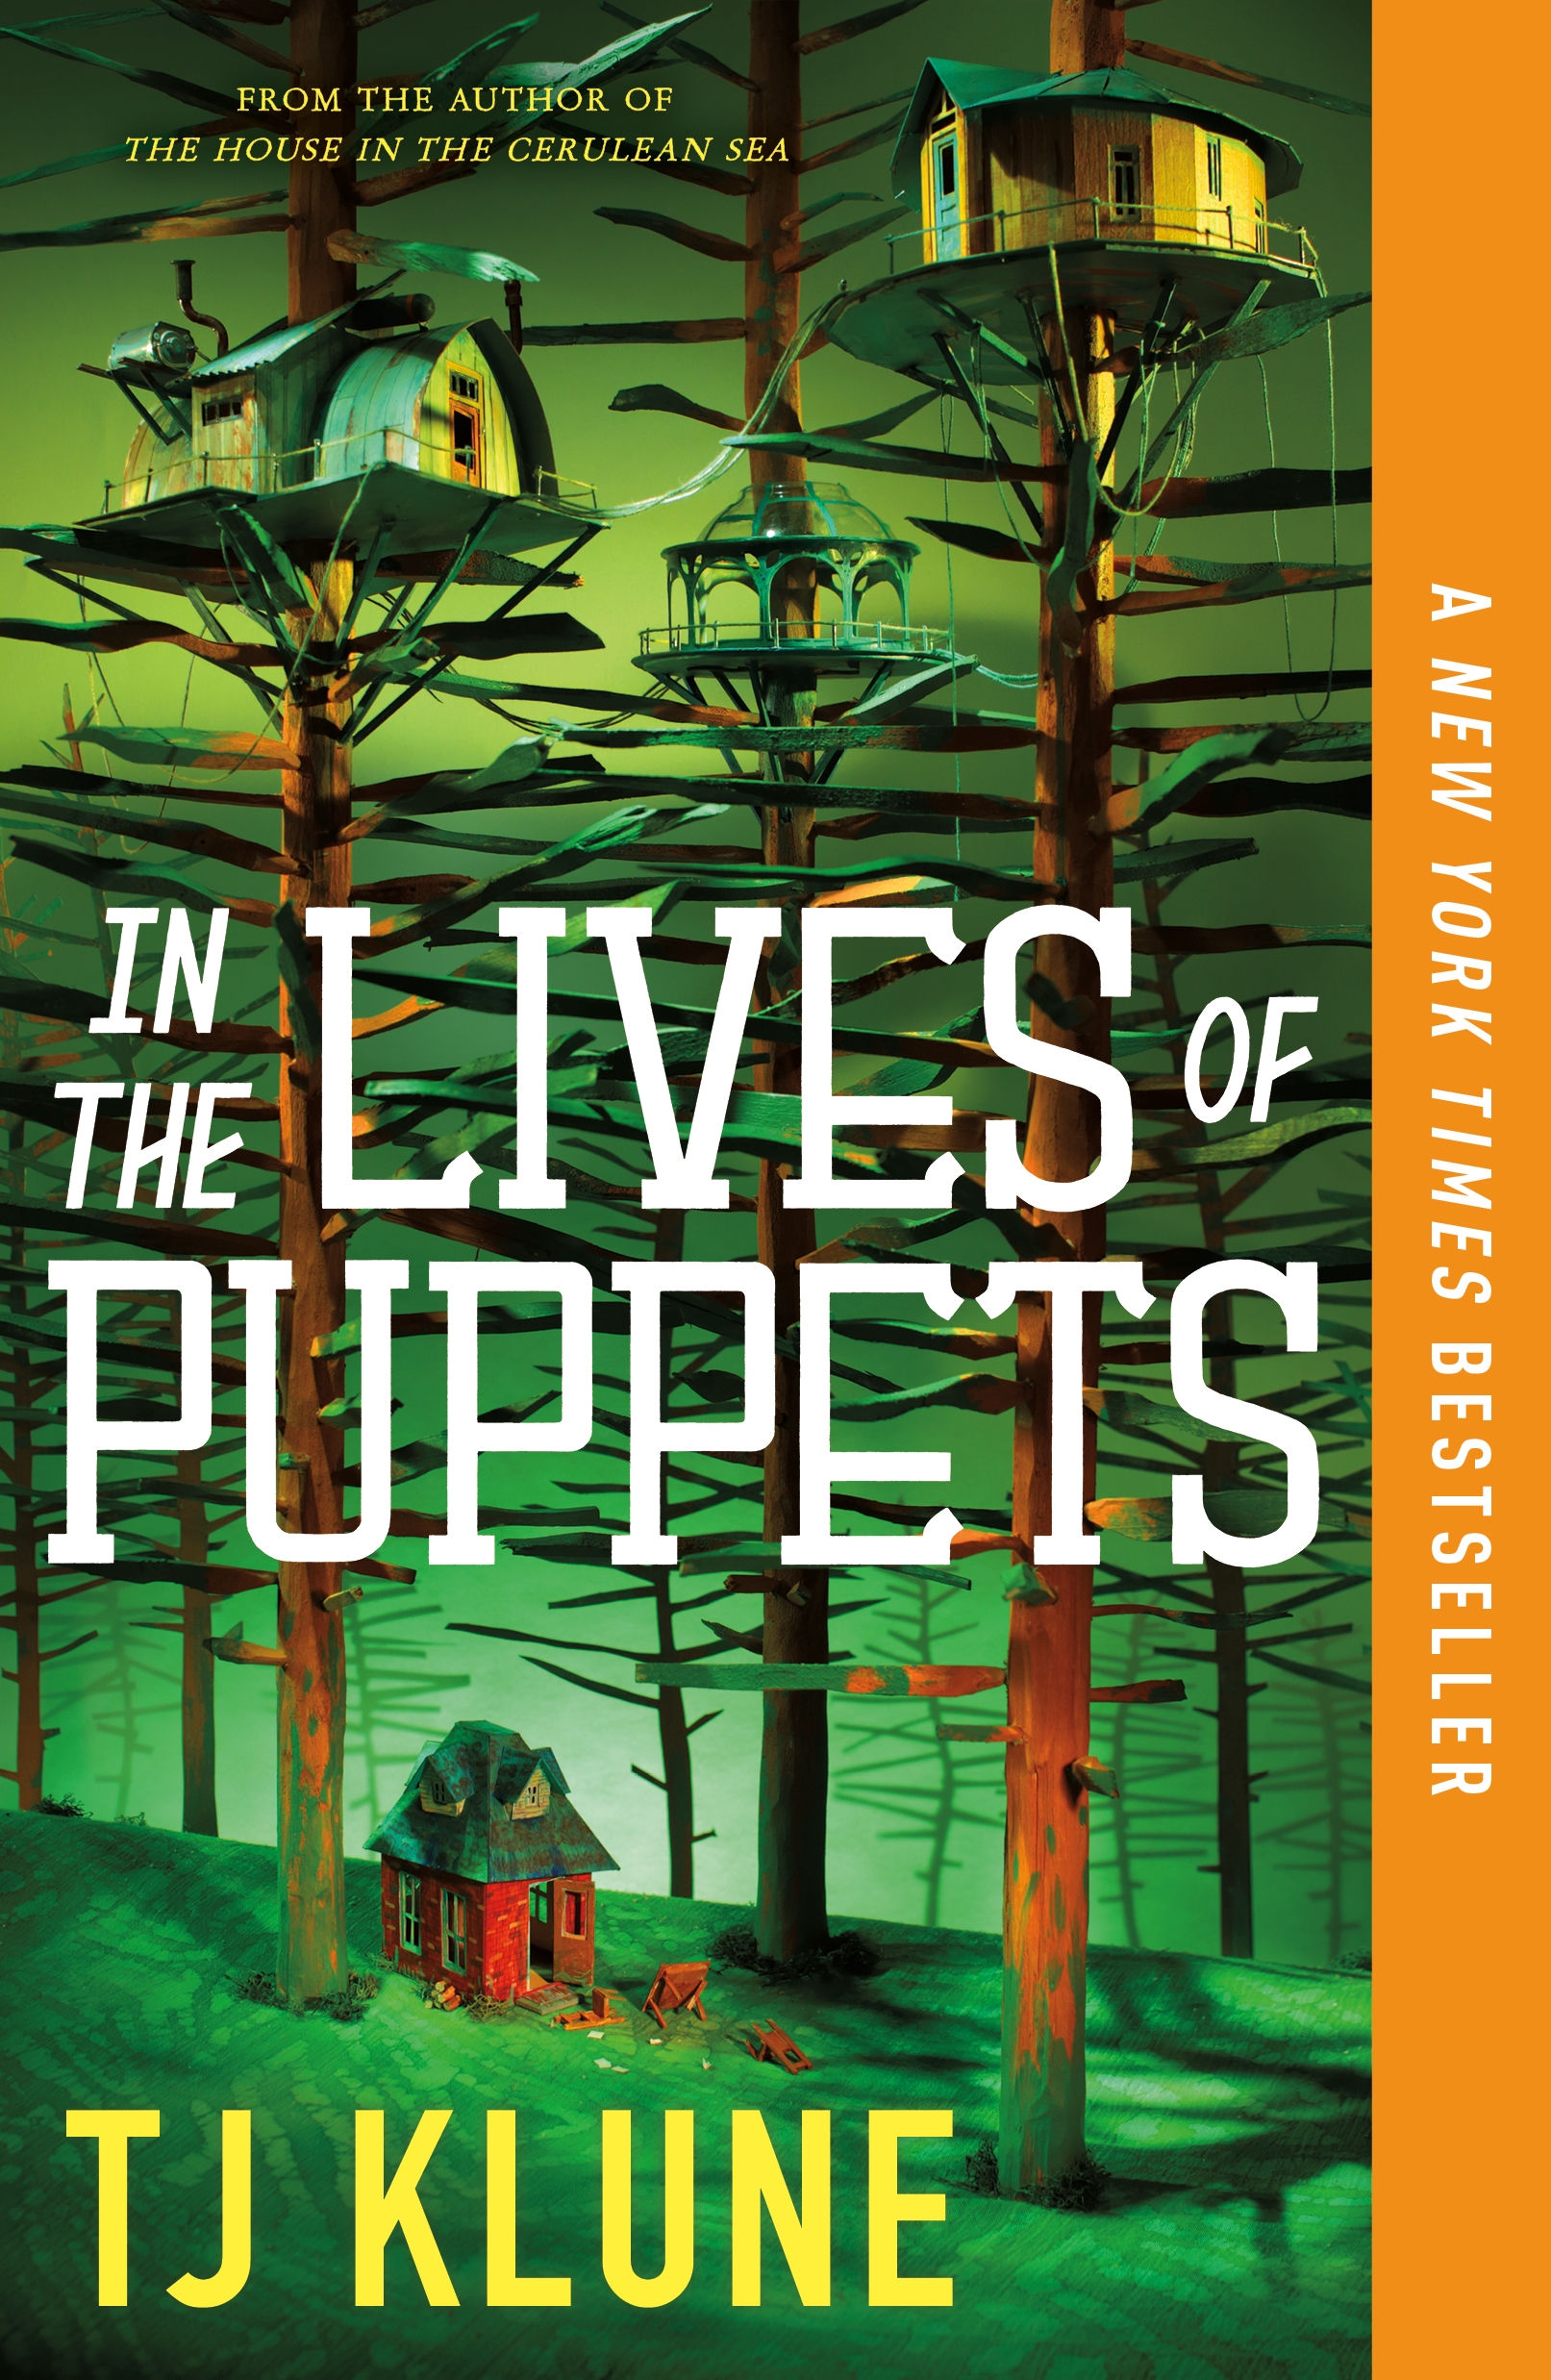 in the lives of puppets tj klune